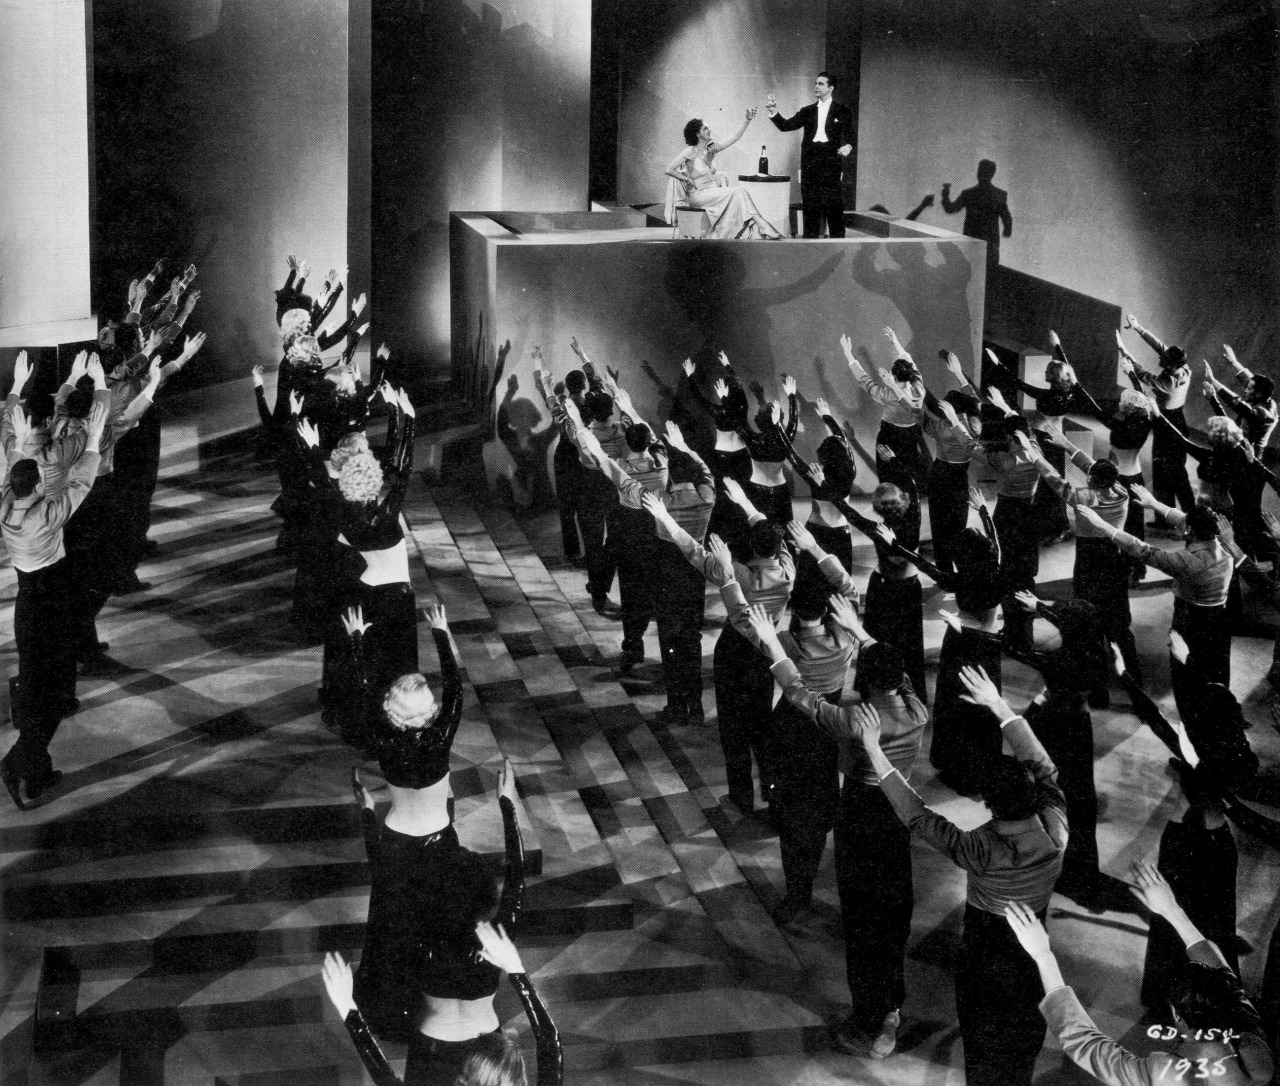 Dance scene in Gold Diggers of 1935 